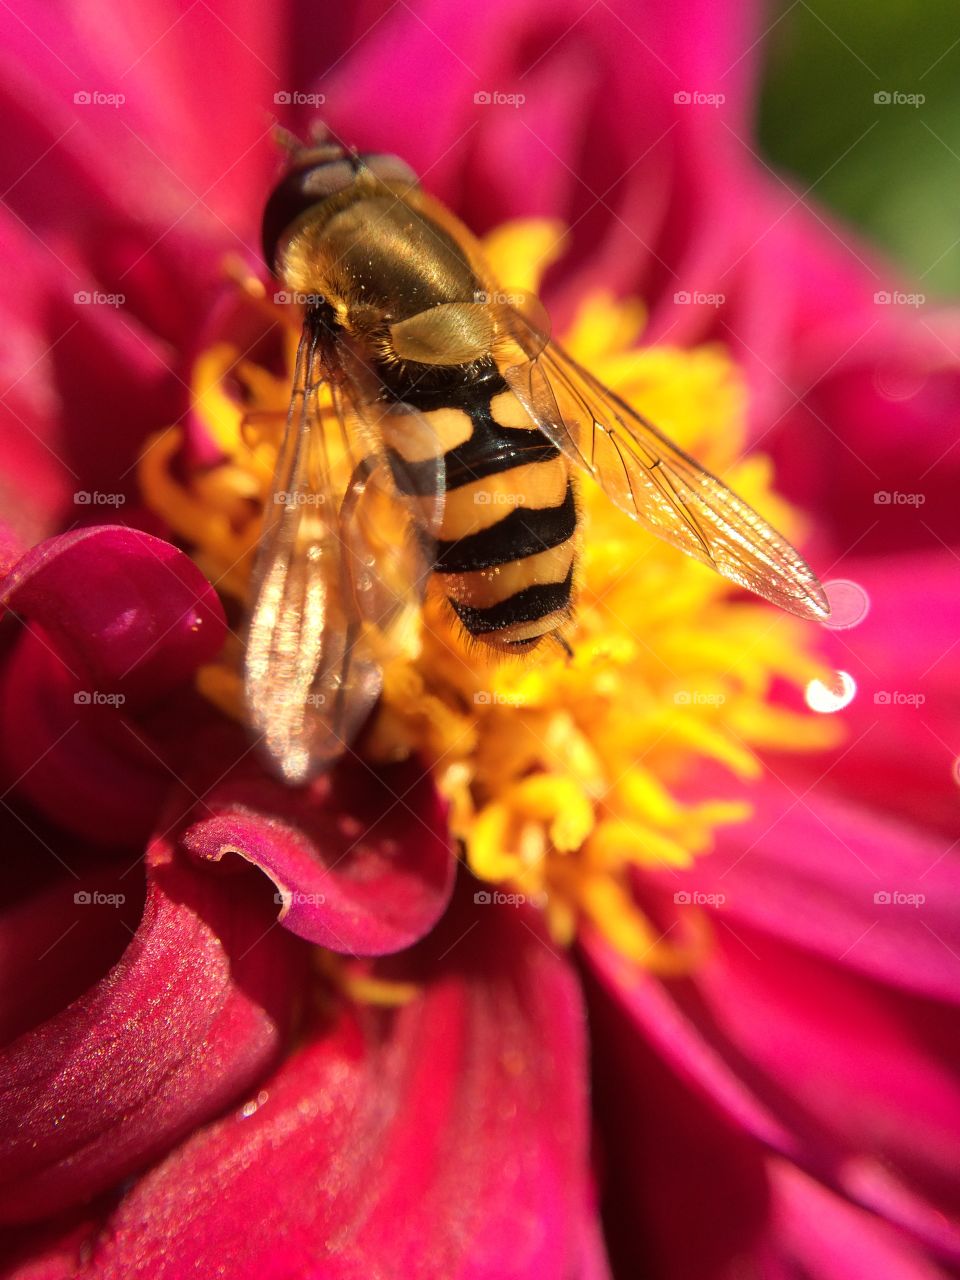 Last Glimpse of Summer. I received this Dahlia as a gift and took a photo as a wasp/hornet decided to gather some late pollen ...